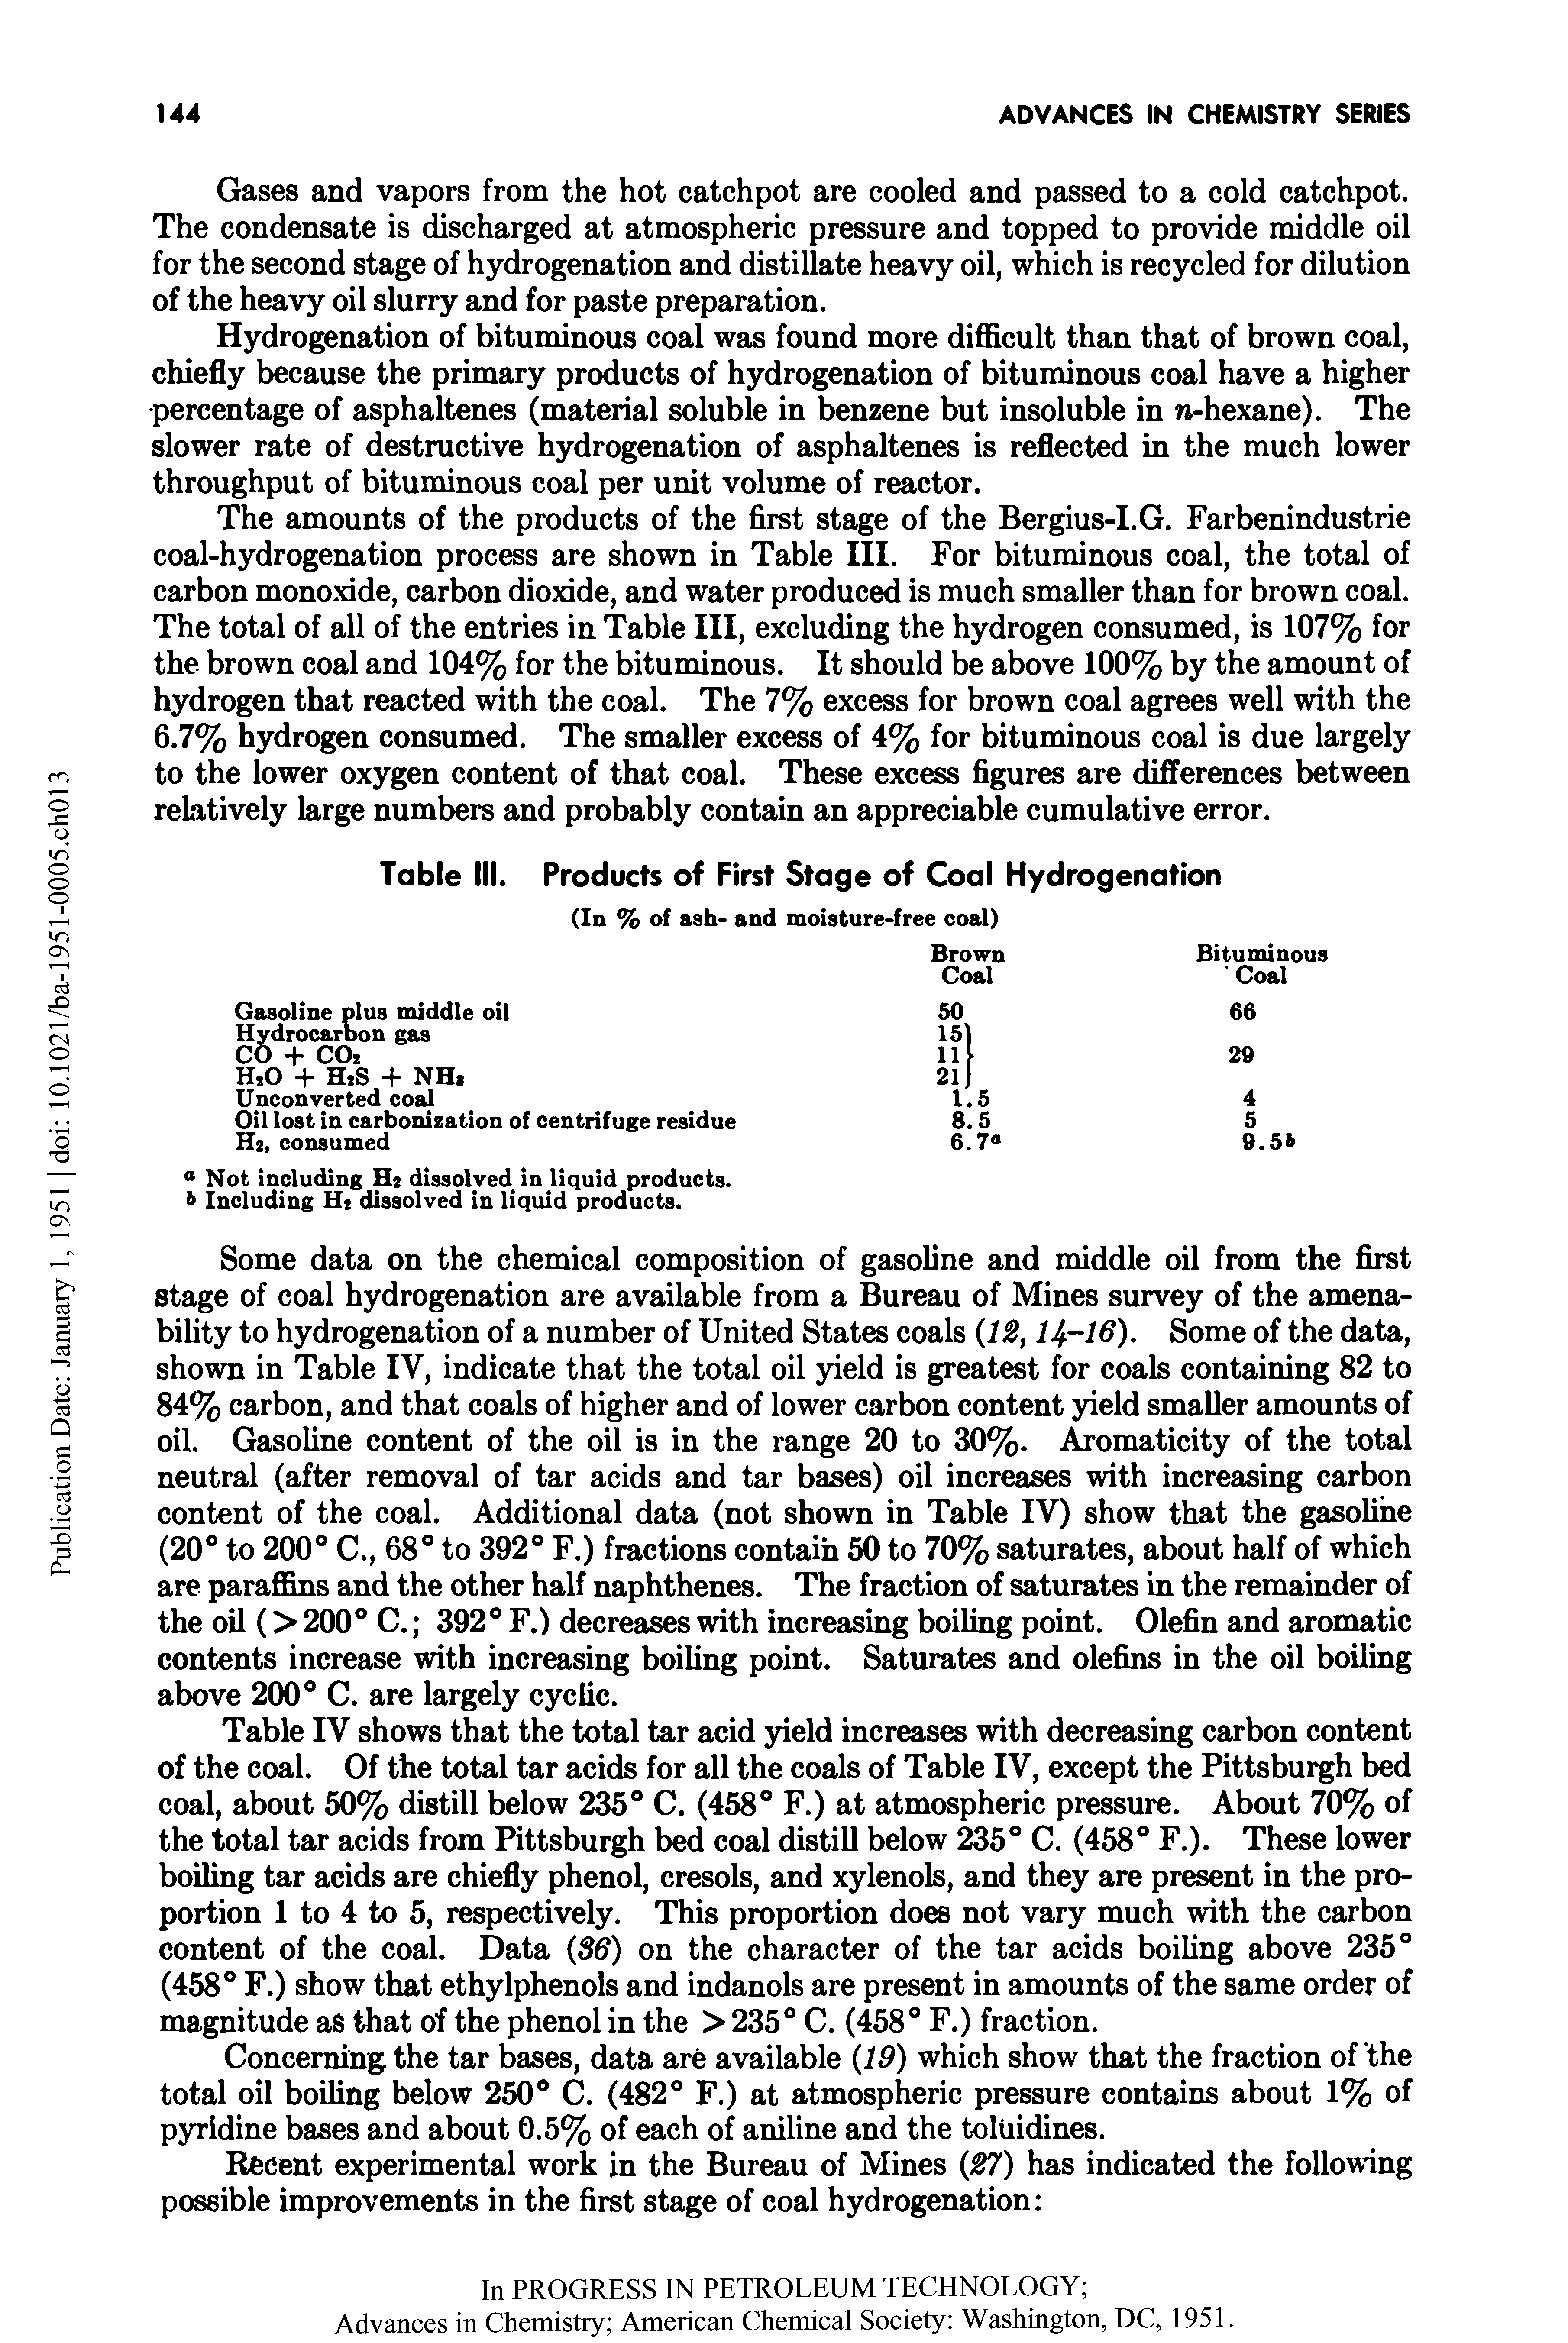 Table IV shows that the total tar acid yield increases with decreasing carbon content of the coal. Of the total tar acids for all the coals of Table IV, except the Pittsburgh bed coal, about 50% distill below 235° C. (458° F.) at atmospheric pressure. About 70% of the total tar acids from Pittsburgh bed coal distill below 235° C. (458° F.). These lower boiling tar acids are chiefly phenol, cresols, and xylenols, and they are present in the proportion 1 to 4 to 5, respectively. This proportion does not vary much with the carbon content of the coal. Data (86) on the character of the tar acids boiling above 235° (458° F.) show that ethylphenols and indanols are present in amounts of the same order of magnitude as that of the phenol in the > 235° C. (458° F.) fraction.